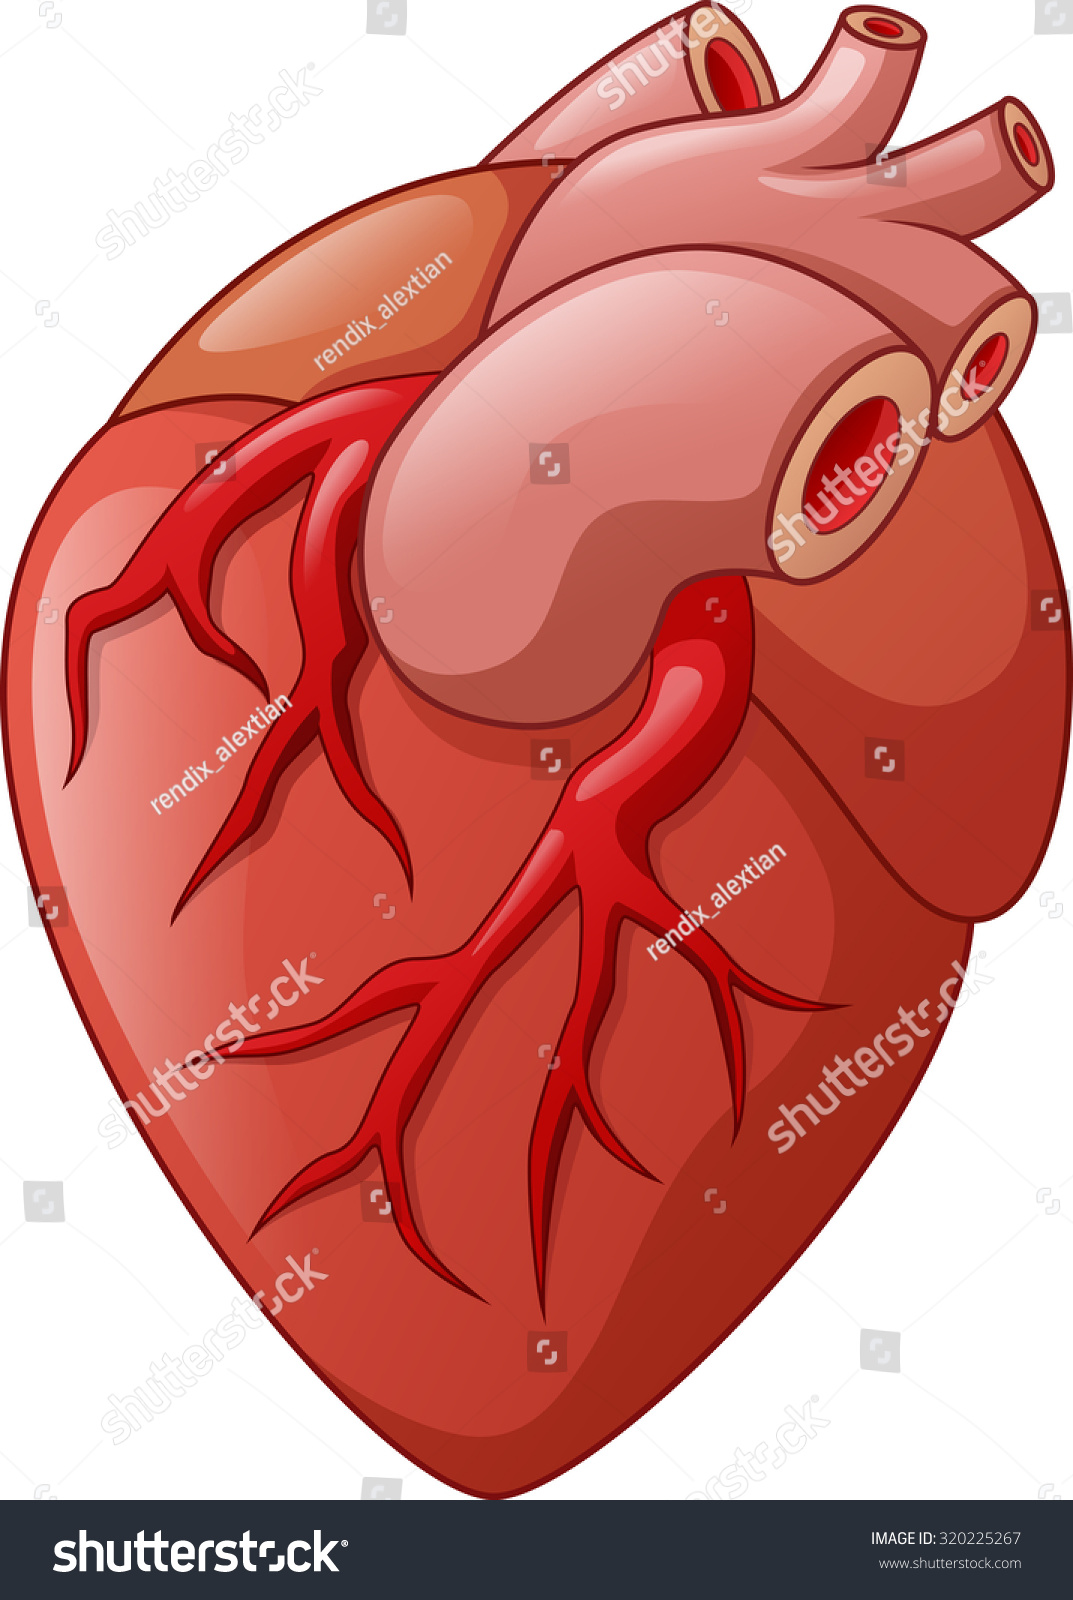 clipart of a human heart - photo #41